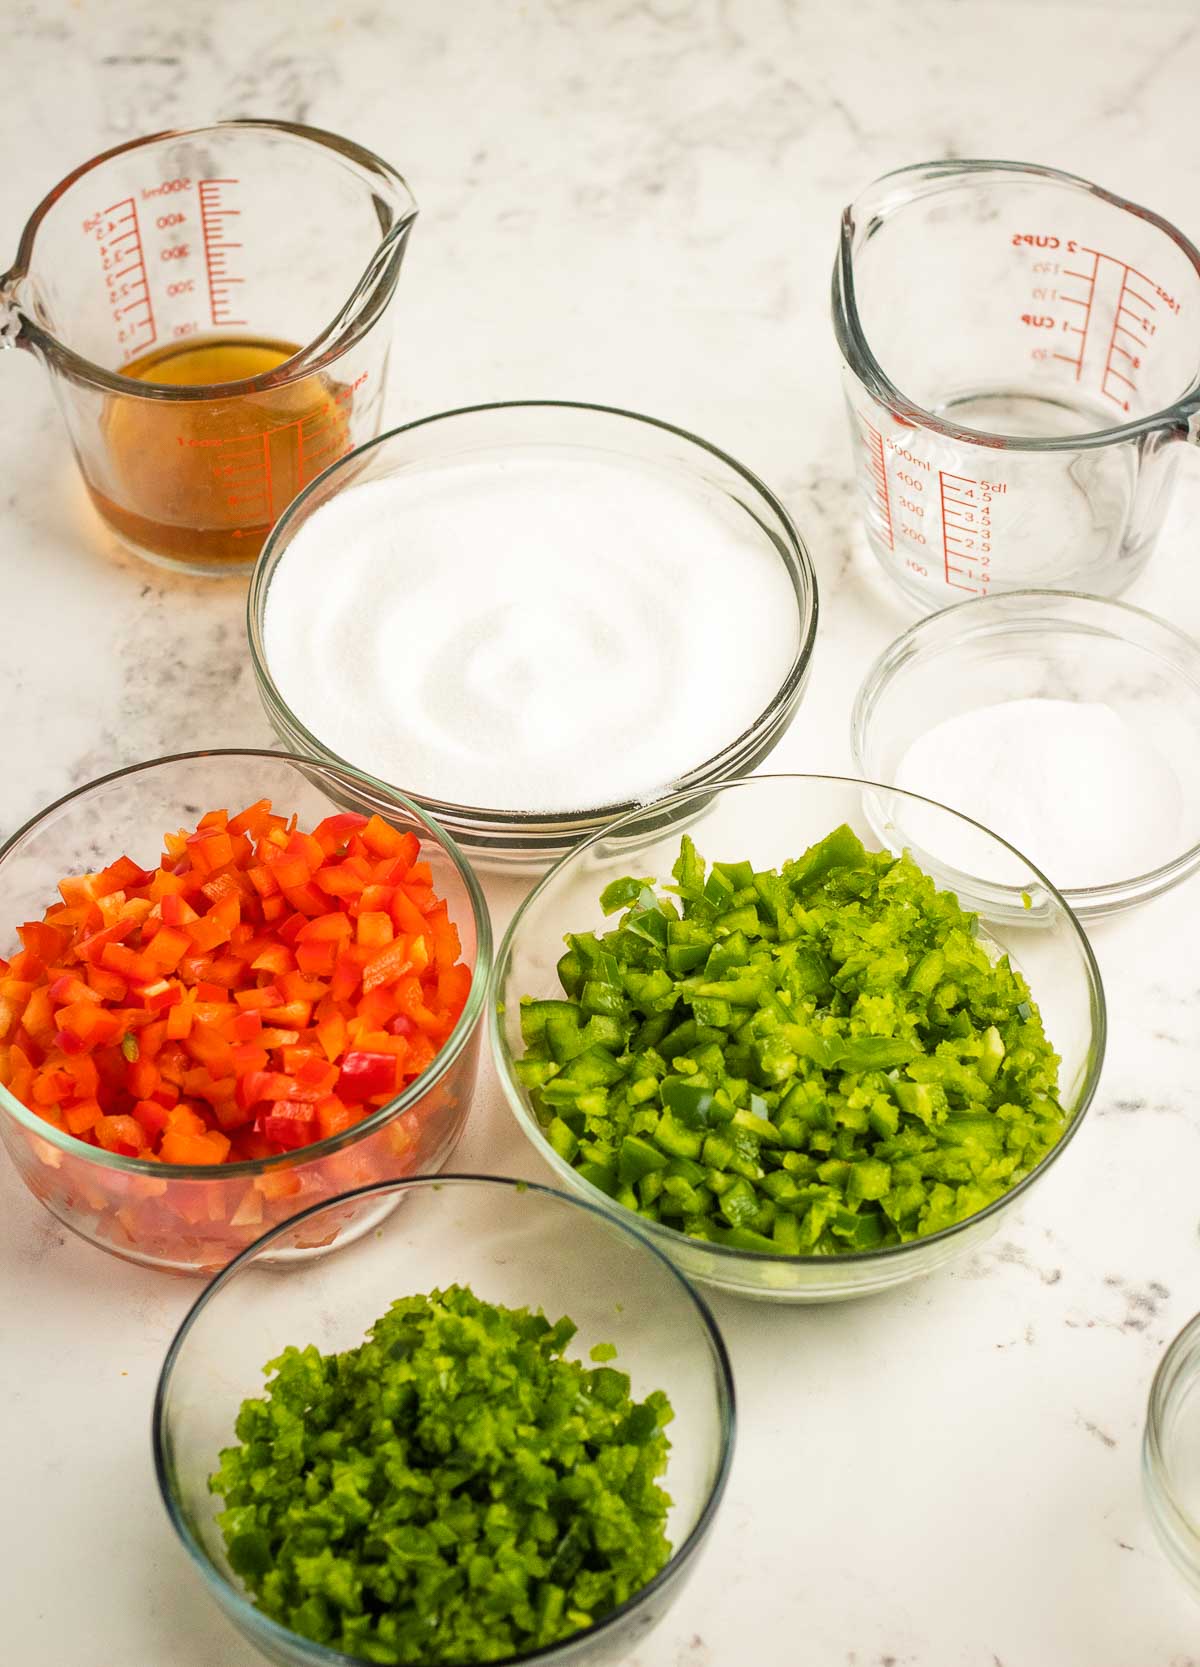 Ingredients to make jalapeno pepper jelly